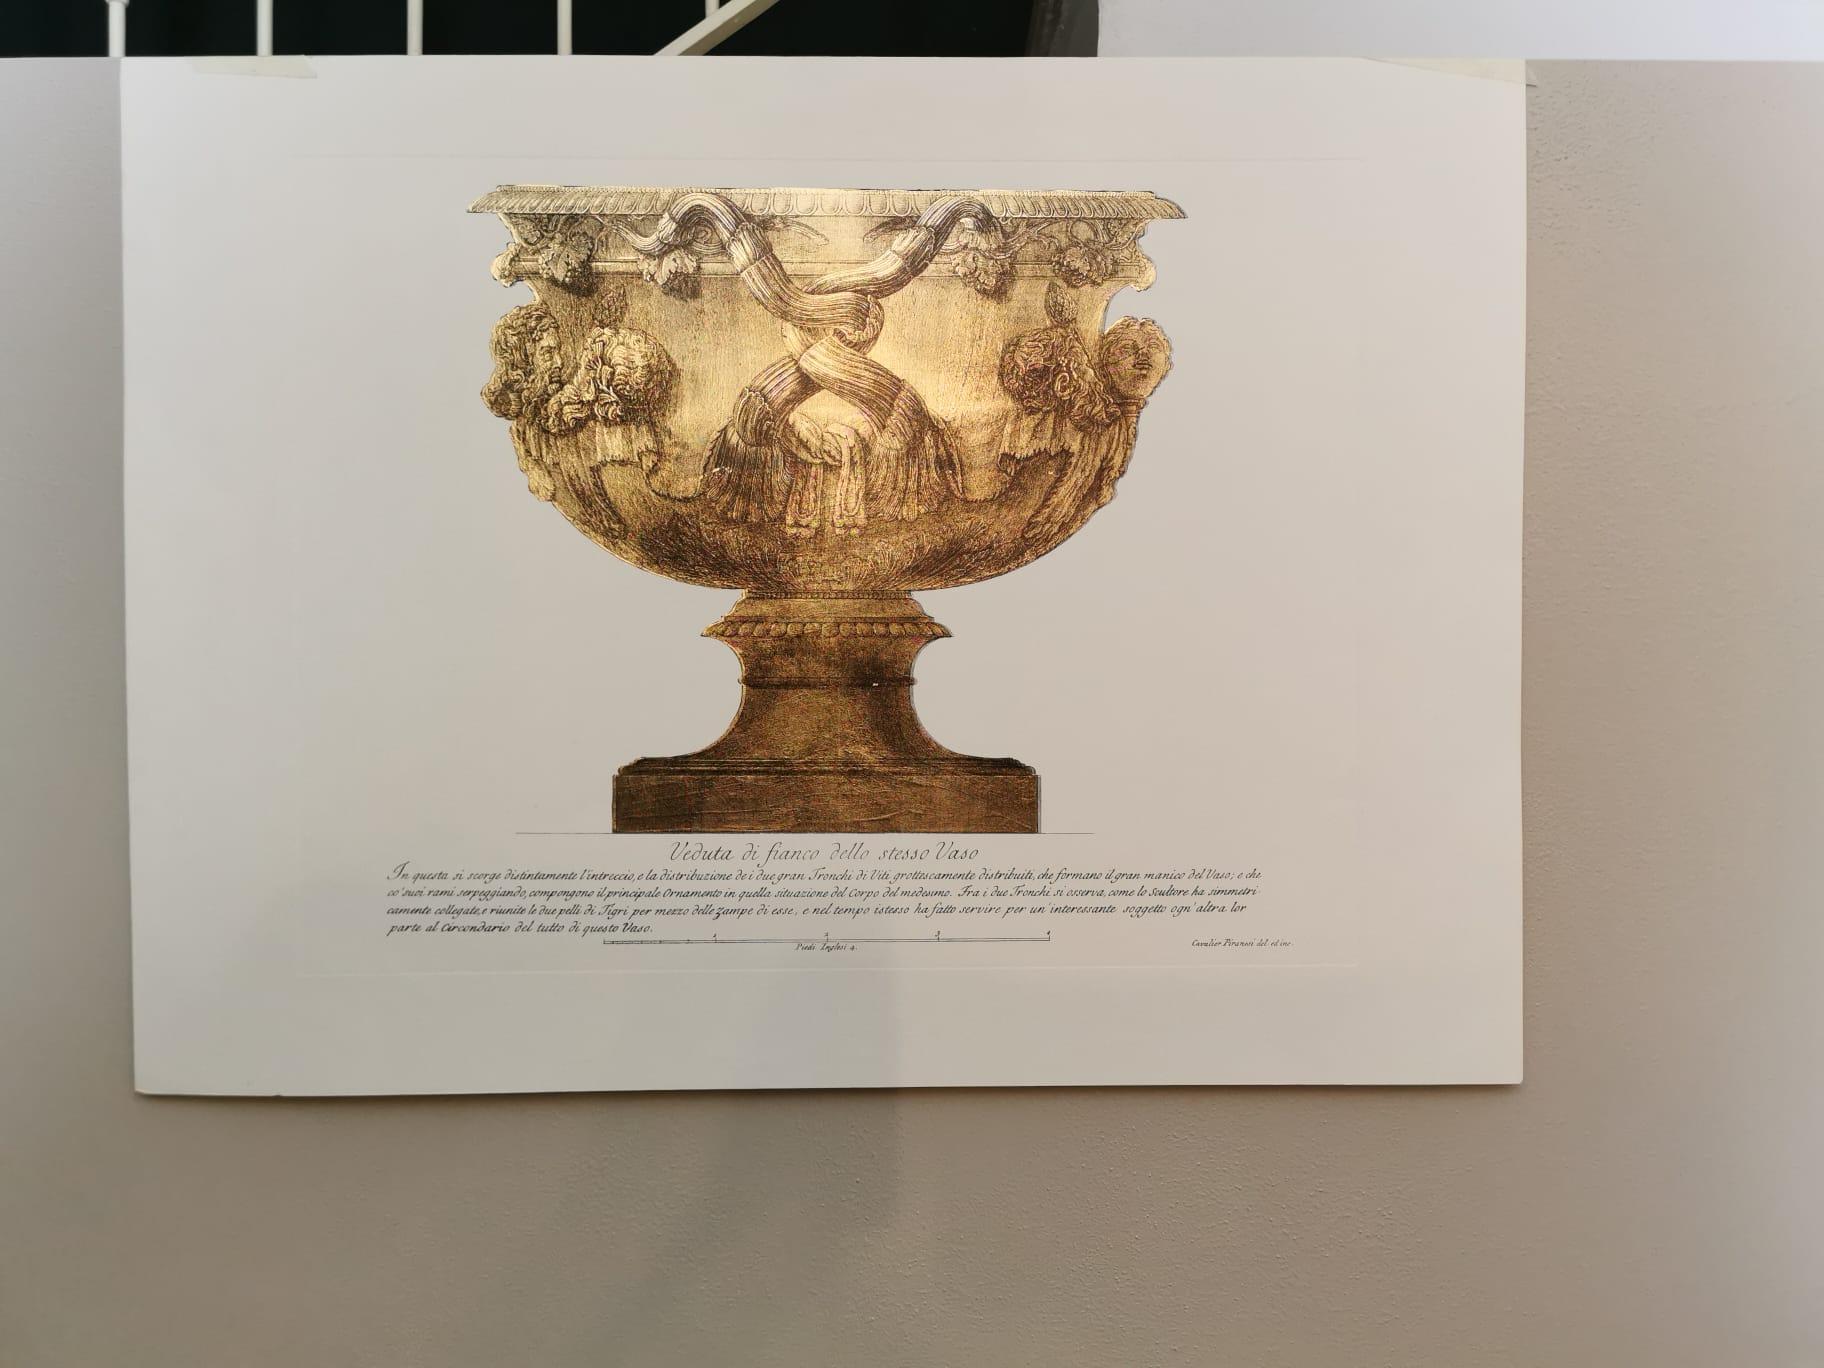 Antique vase handcrafted print. The technique of printing on gold leaf is our reinterpretation of an ancient tradition.

The print is sold unframed but by contacting us we can also provide you with the most suitable frame for your furnishing